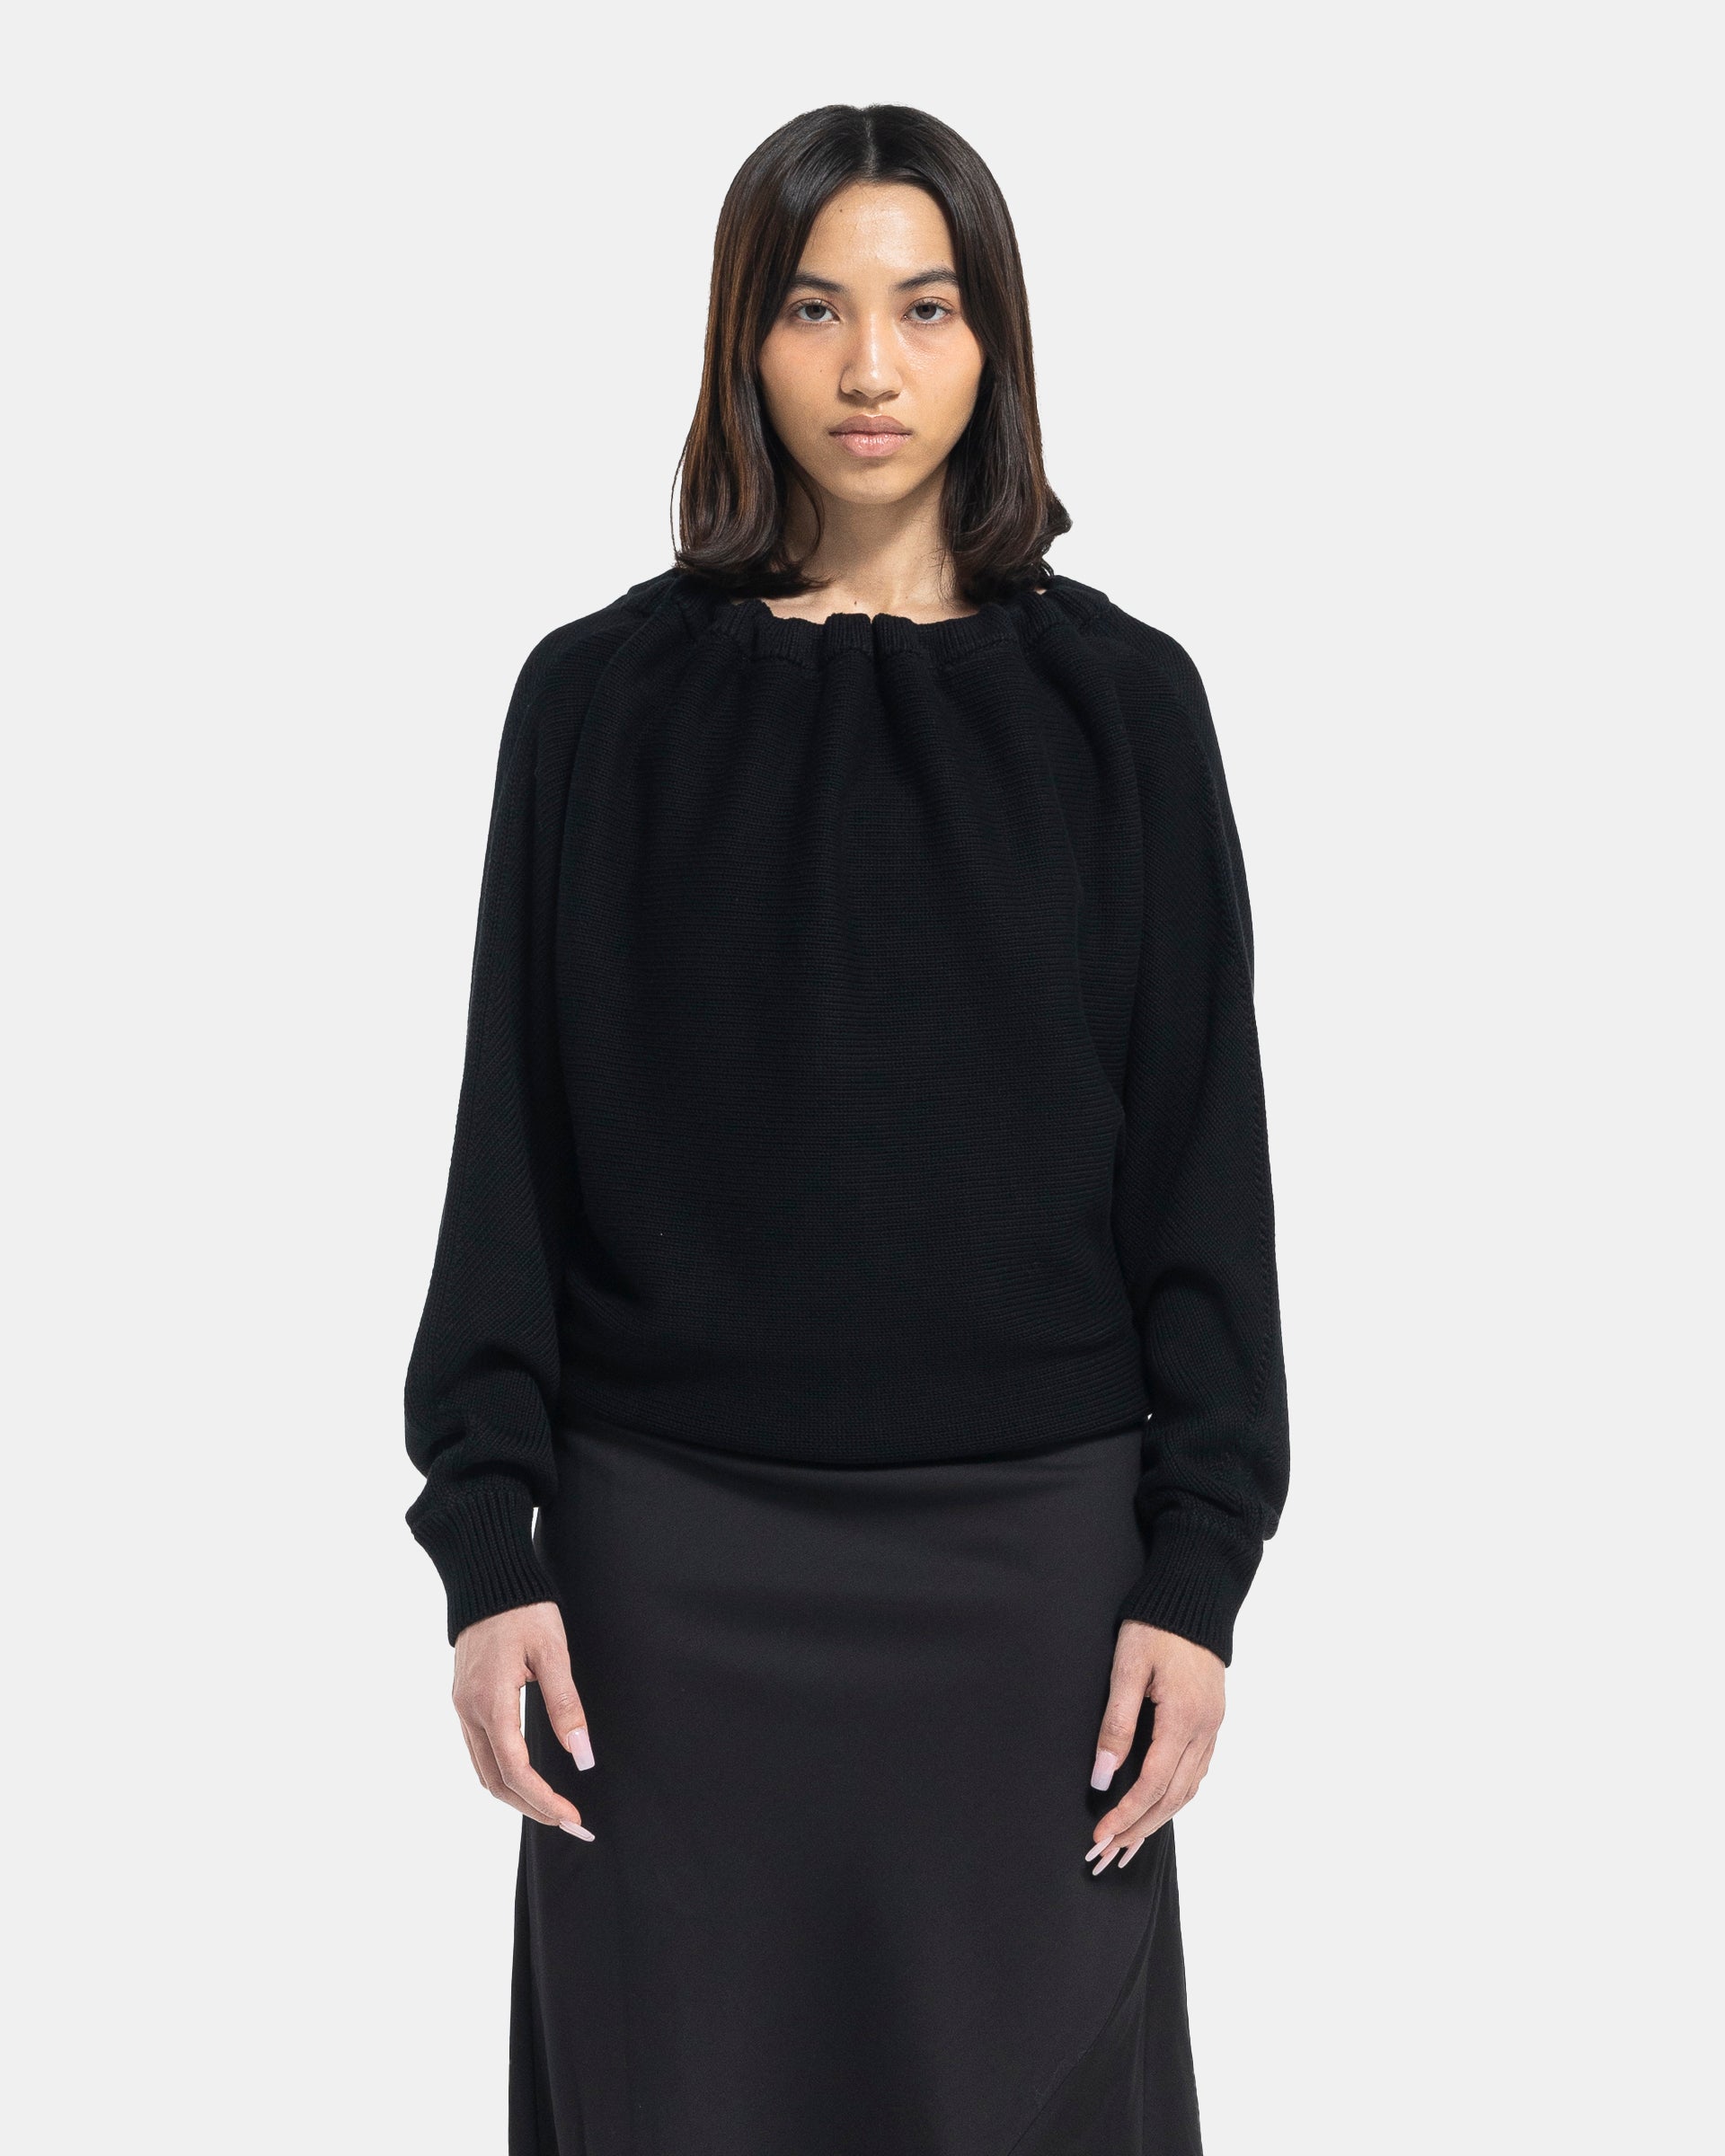 Ruched Dolman Sleeve Sweater in Black